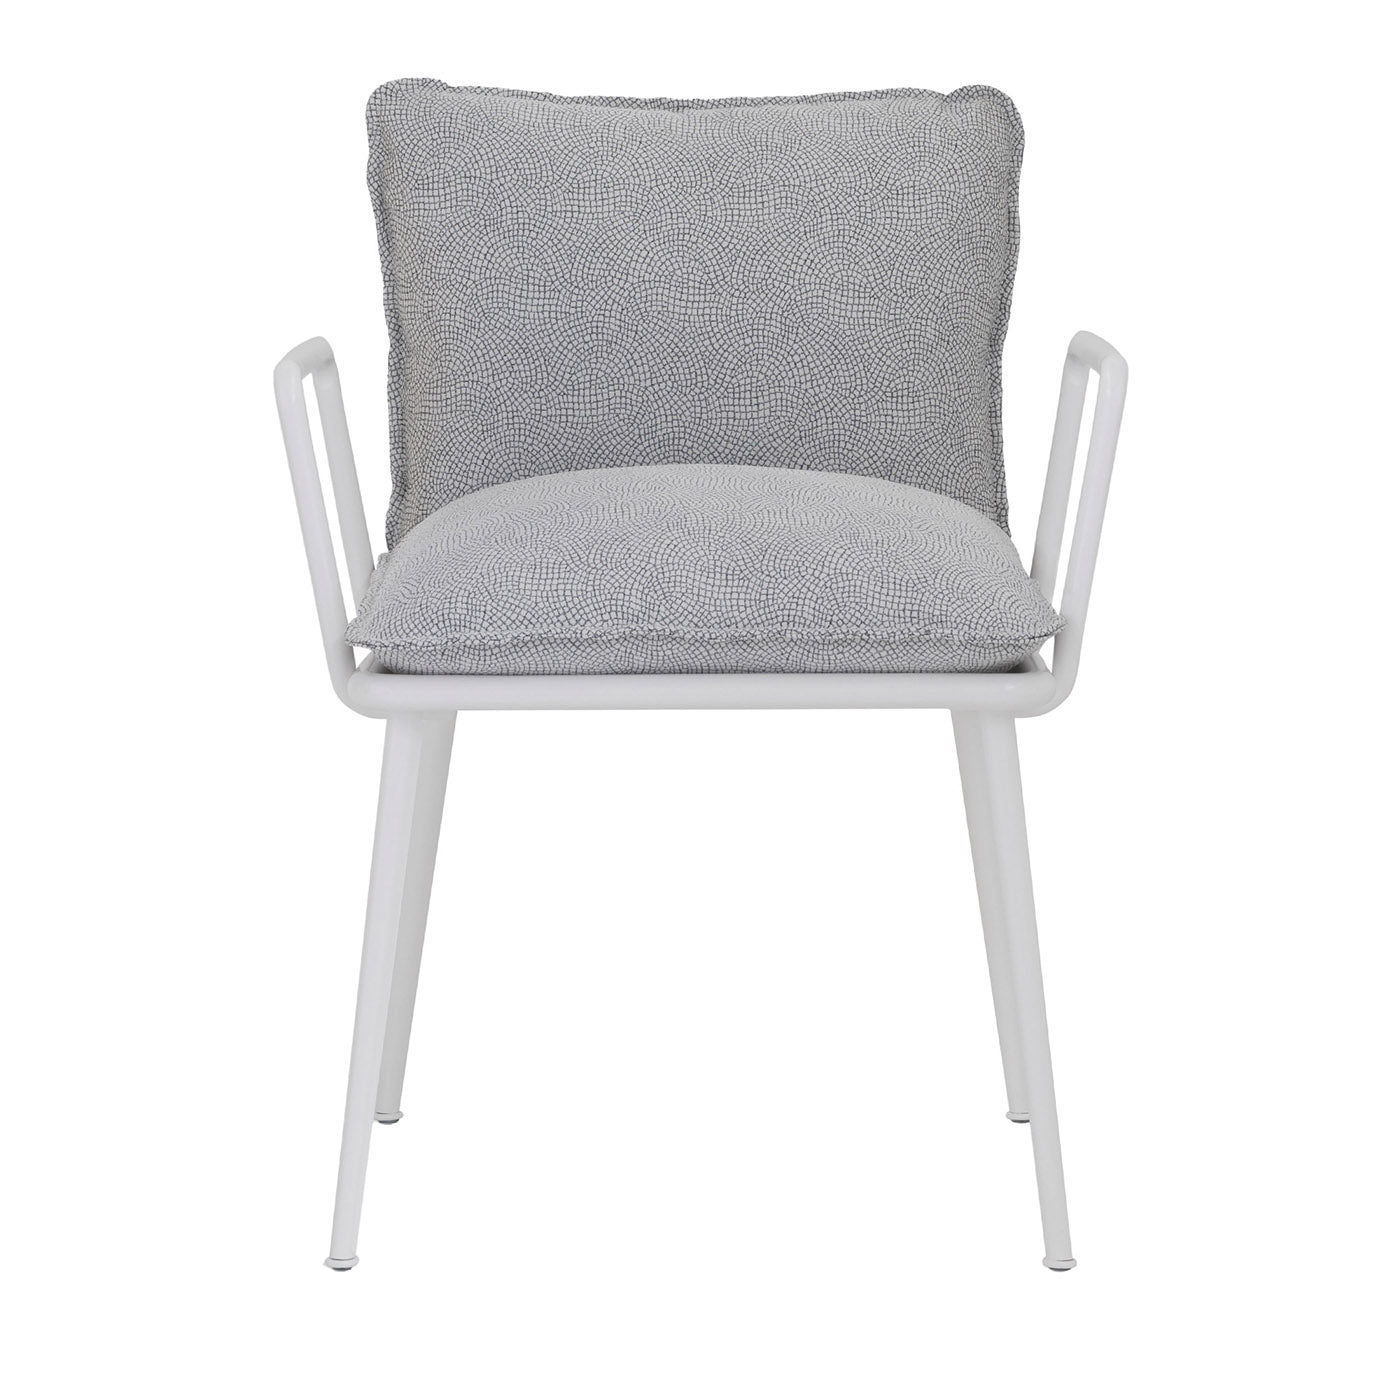 Lipari Outdoor Ivory Chair with Armrests - Main view